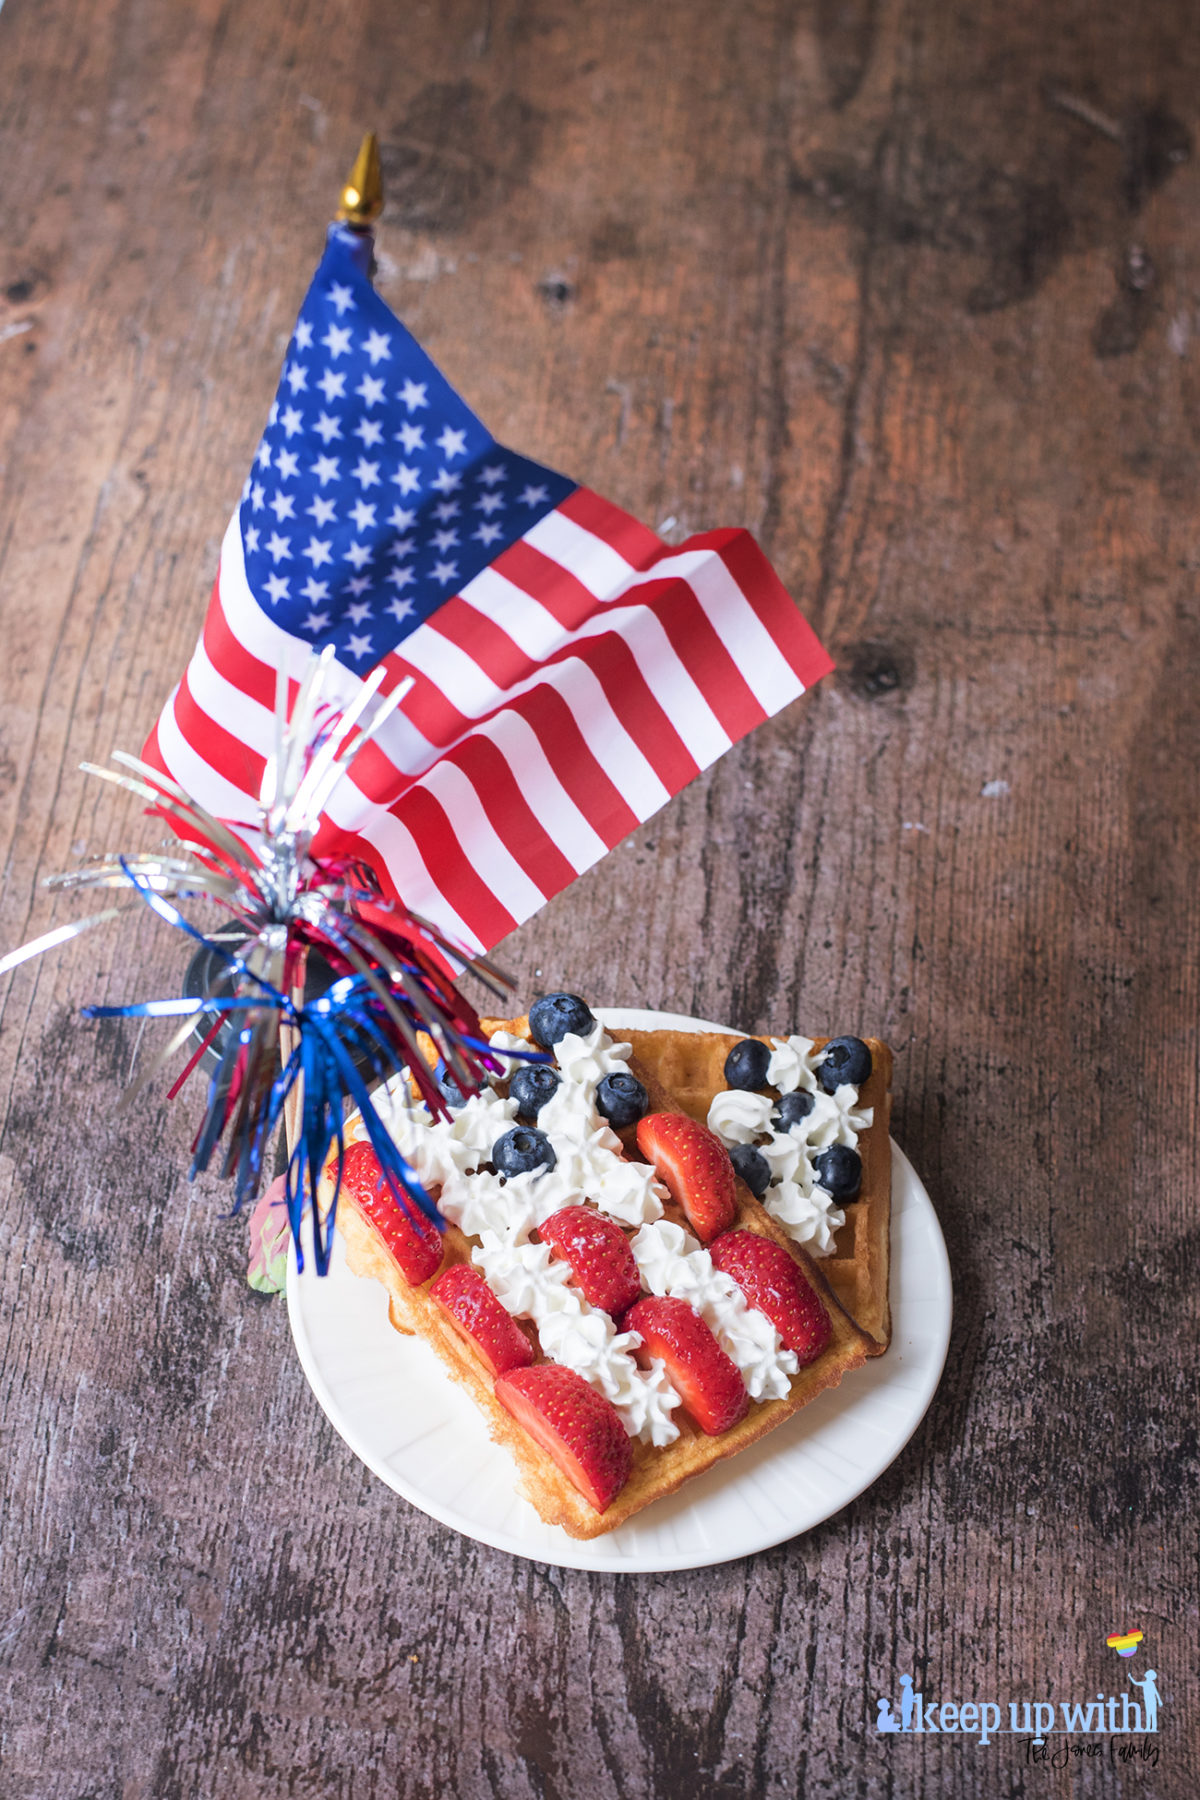 Image shows rectangular sweet breakfast waffles on a white vera wang plate. The waffles are decorated in the style of the American Flag. There are sliced strawberries for the red stripes, blueberries for the space around the stars, and cream piped as the white stars and stripes. The plate is set on a dark hardwood background and there is a small American Flag next to it and a red, silver and blue set of firework decorations. Image by Sara-Jayne Jones, Keep Up With The Jones Family.